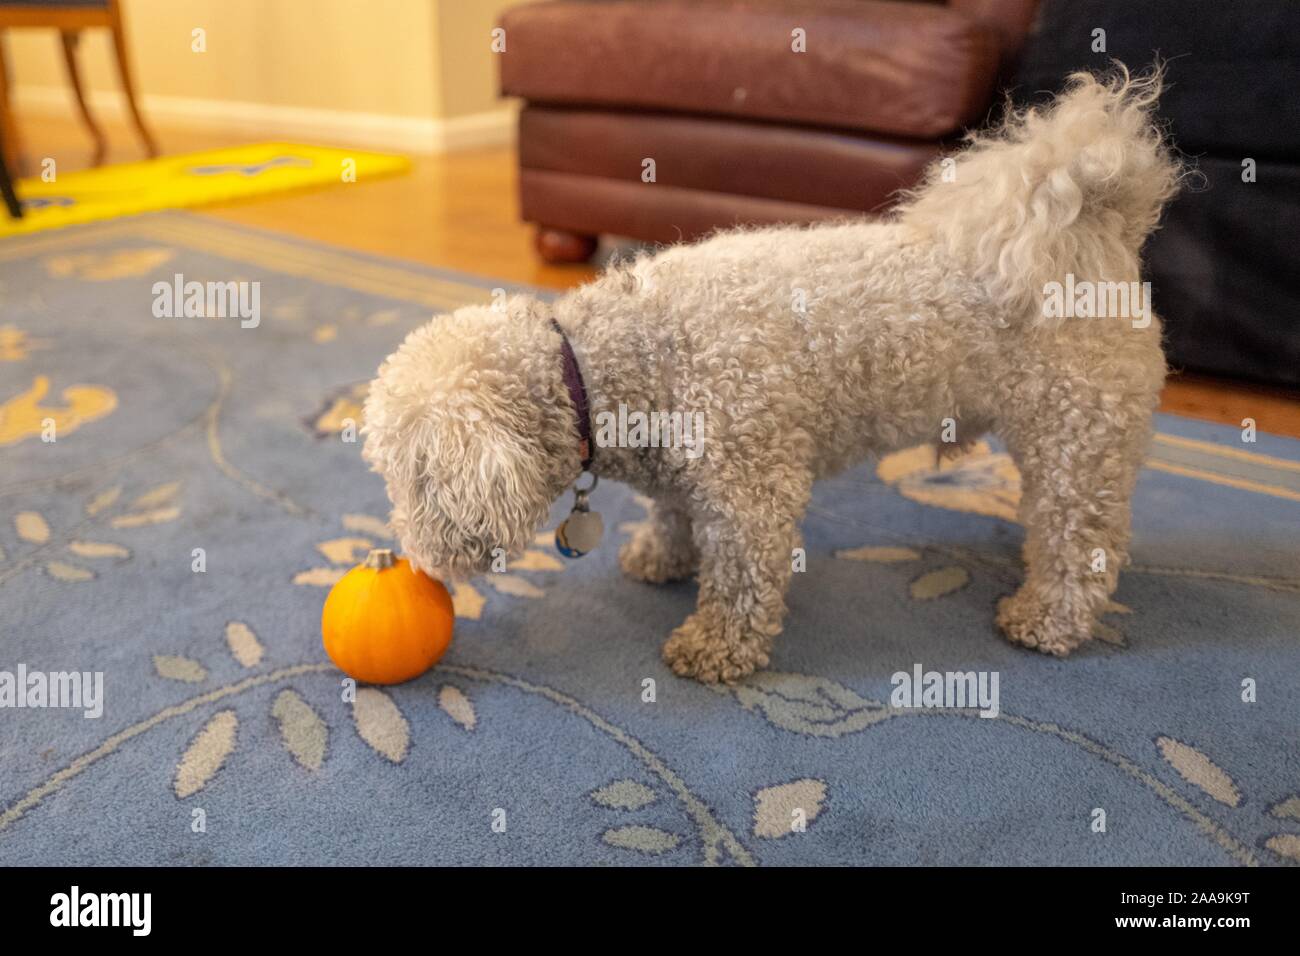 Close-up of a cute Bichon Frise dog sniffing a pumpkin, suggesting Thanksgiving or Autumn, on a carpet in a domestic room, November 9, 2019. () Stock Photo